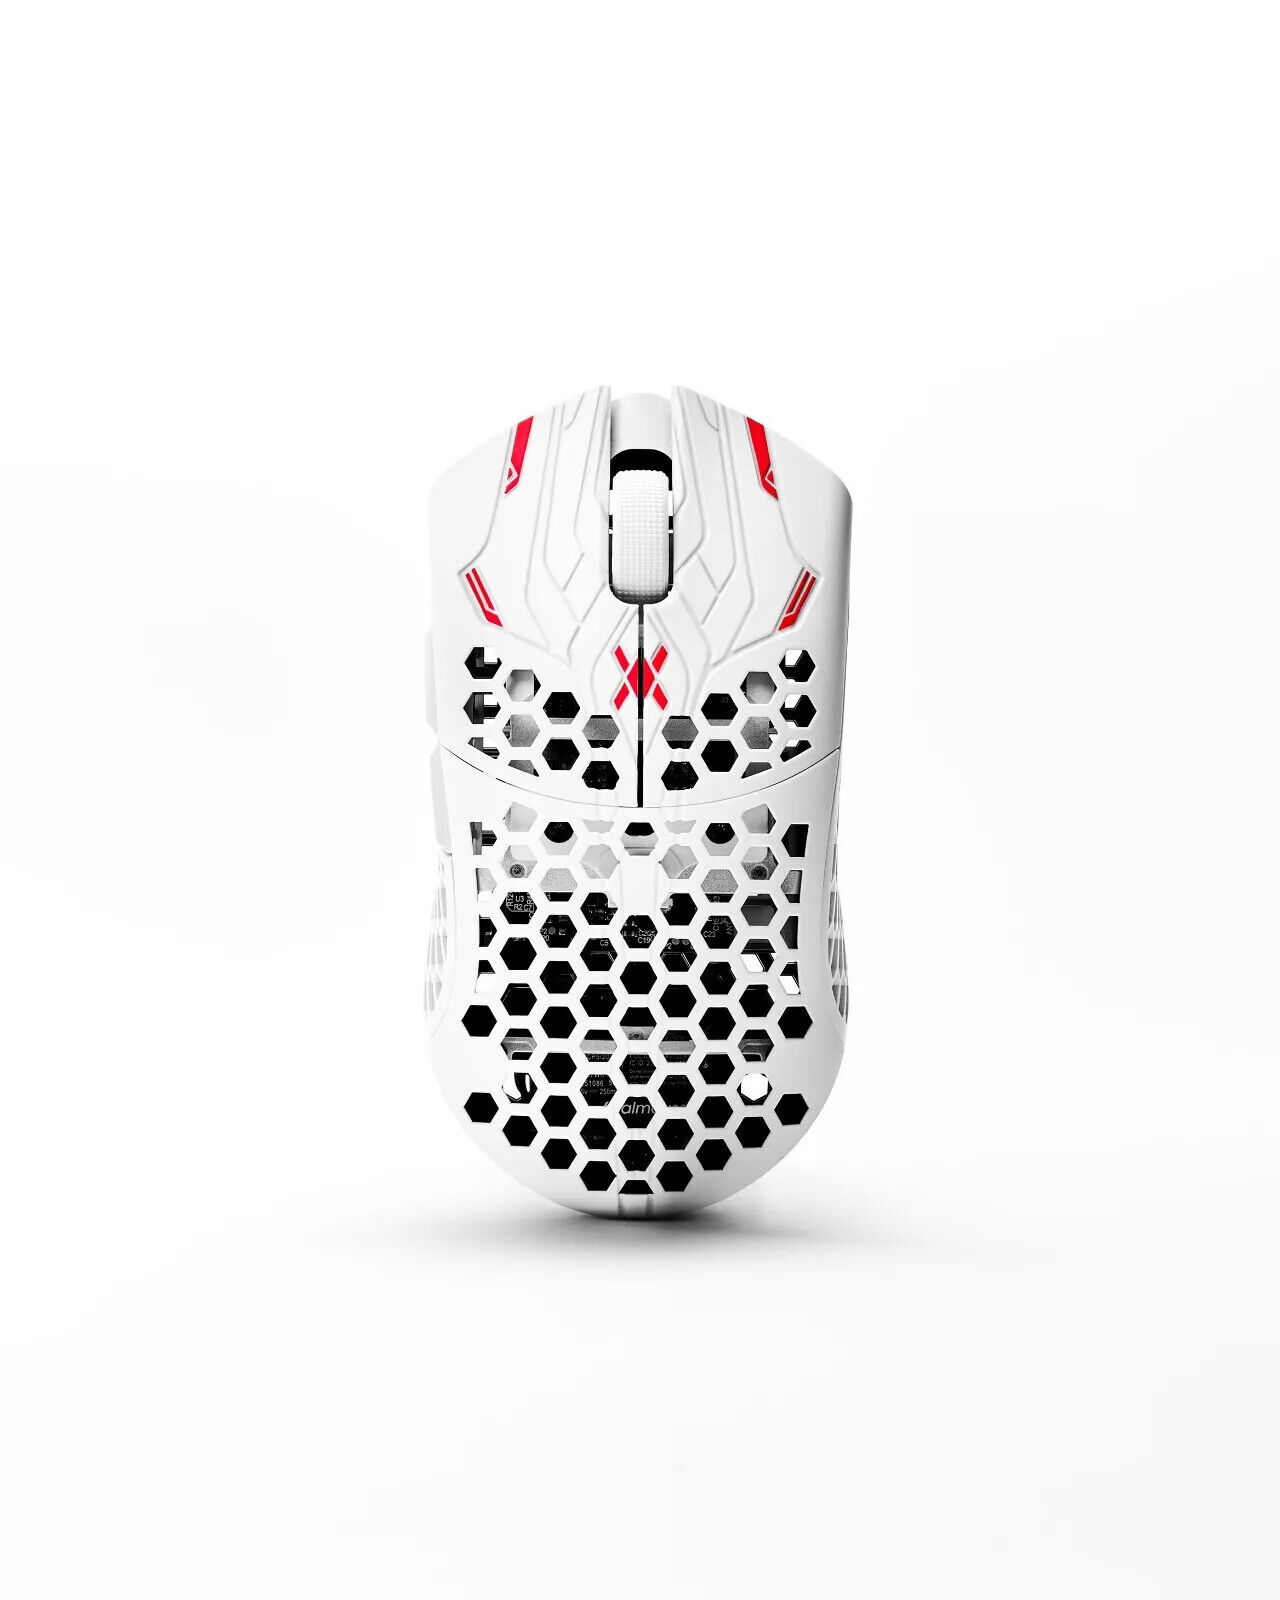 Finalmouse Ultralight X Pro Series | aceu | ALL SIZES PRESALE 🔥 CONFIRMED 🔥